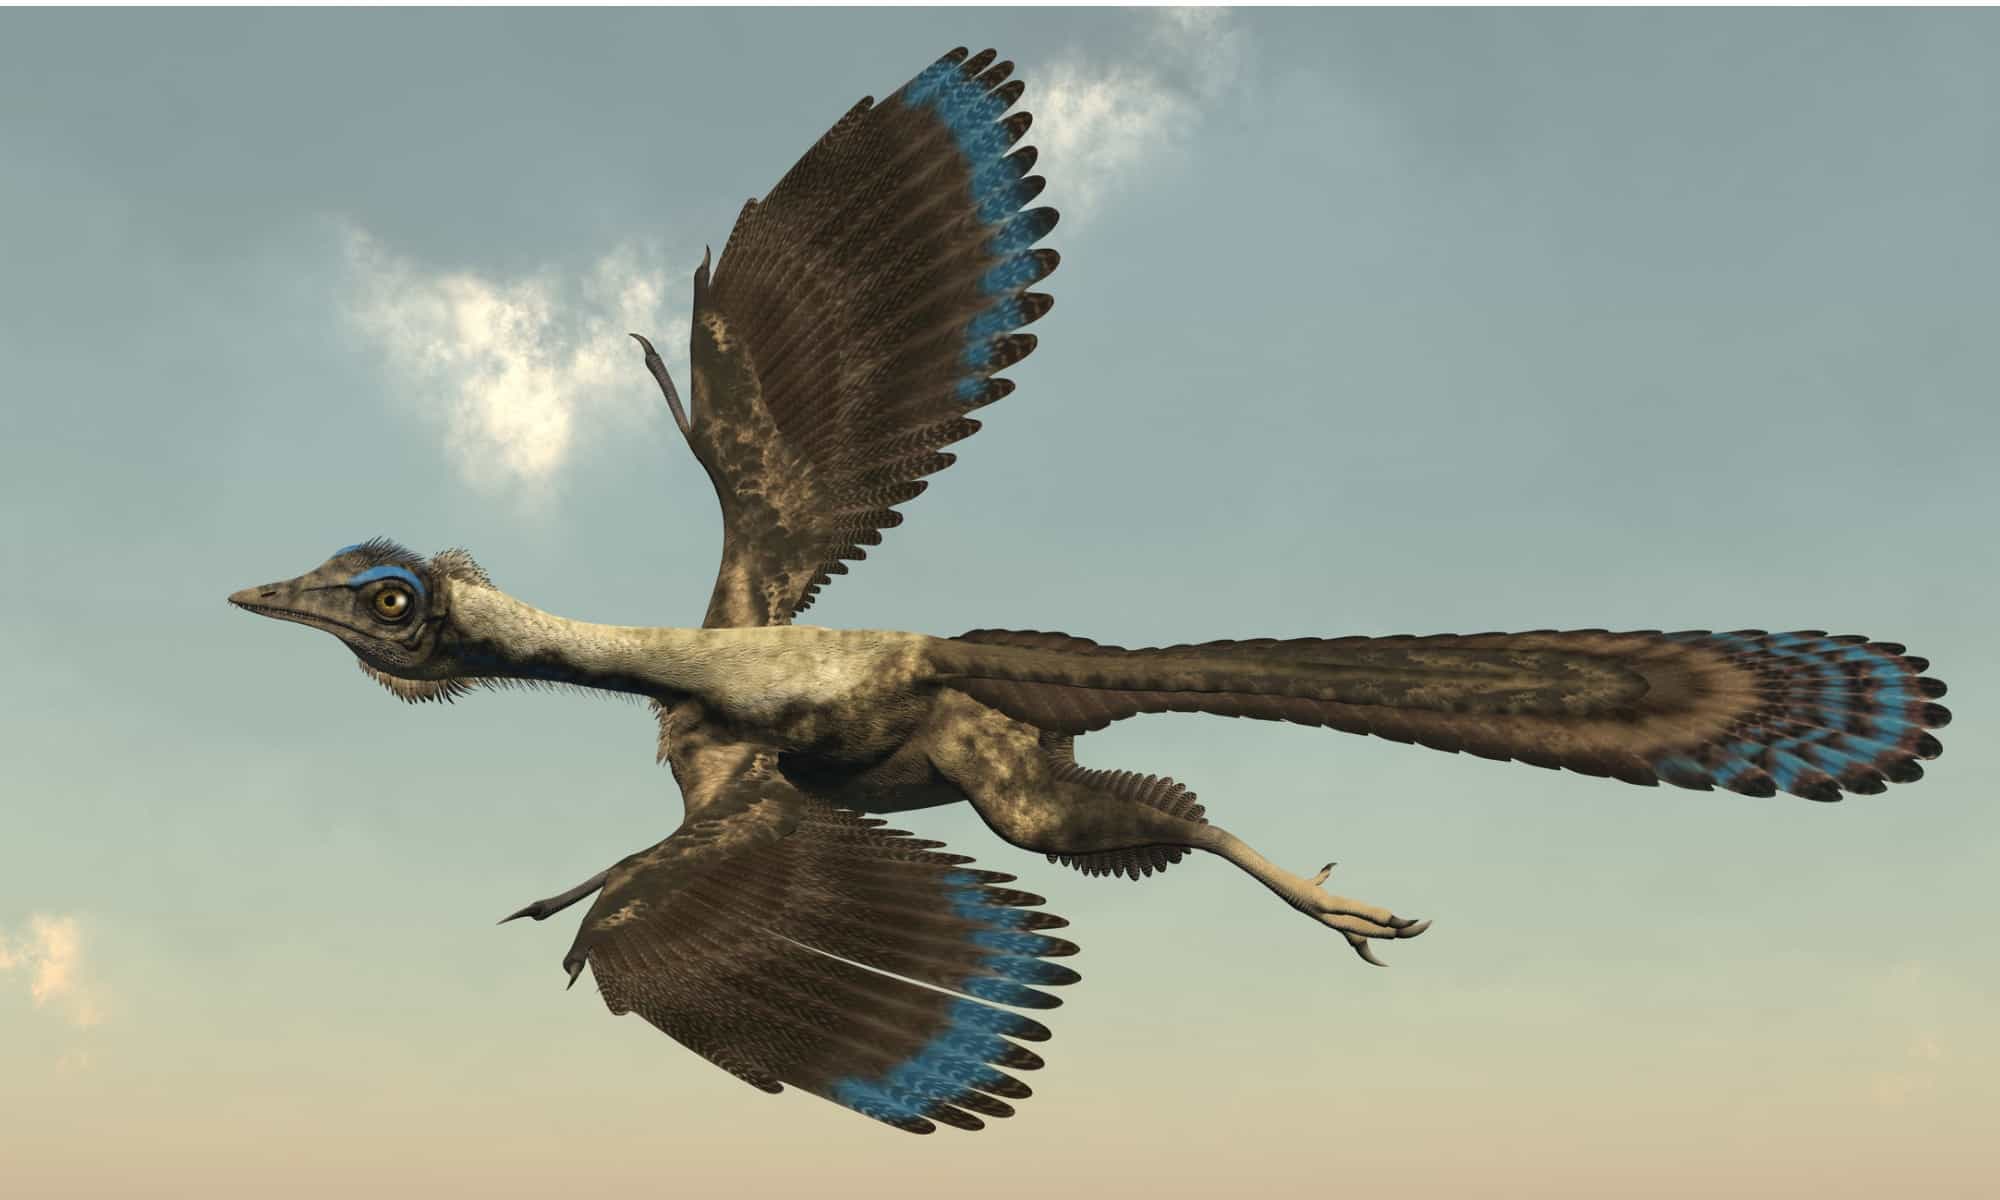 archaeopteryx-animal-facts-archaeopteryx-lithographica-wiki-point